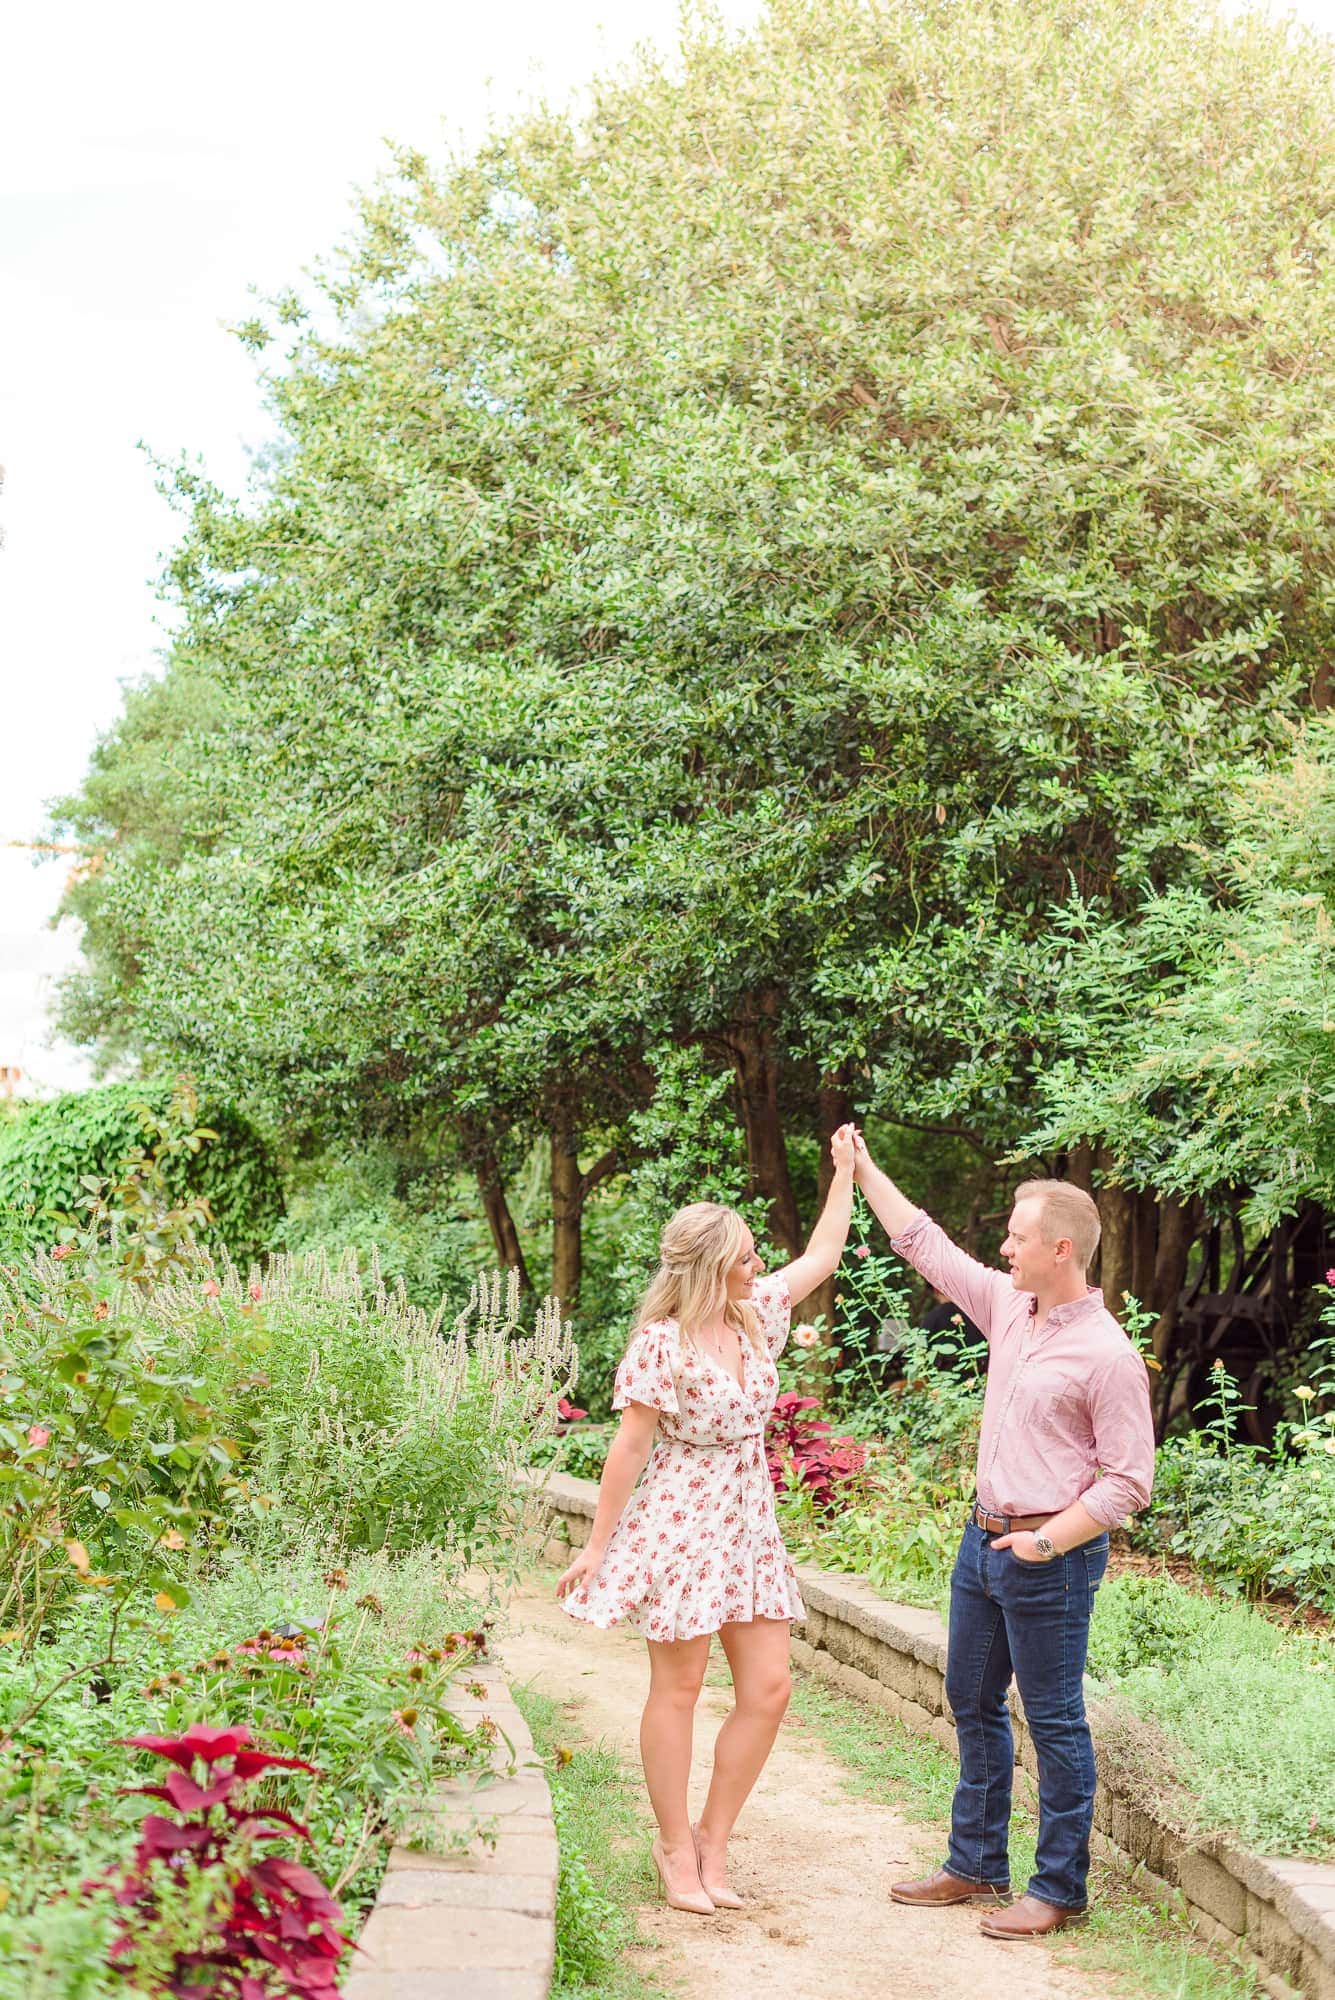 The paths at the Charlotte rose garden are perfect for dancing with one another.